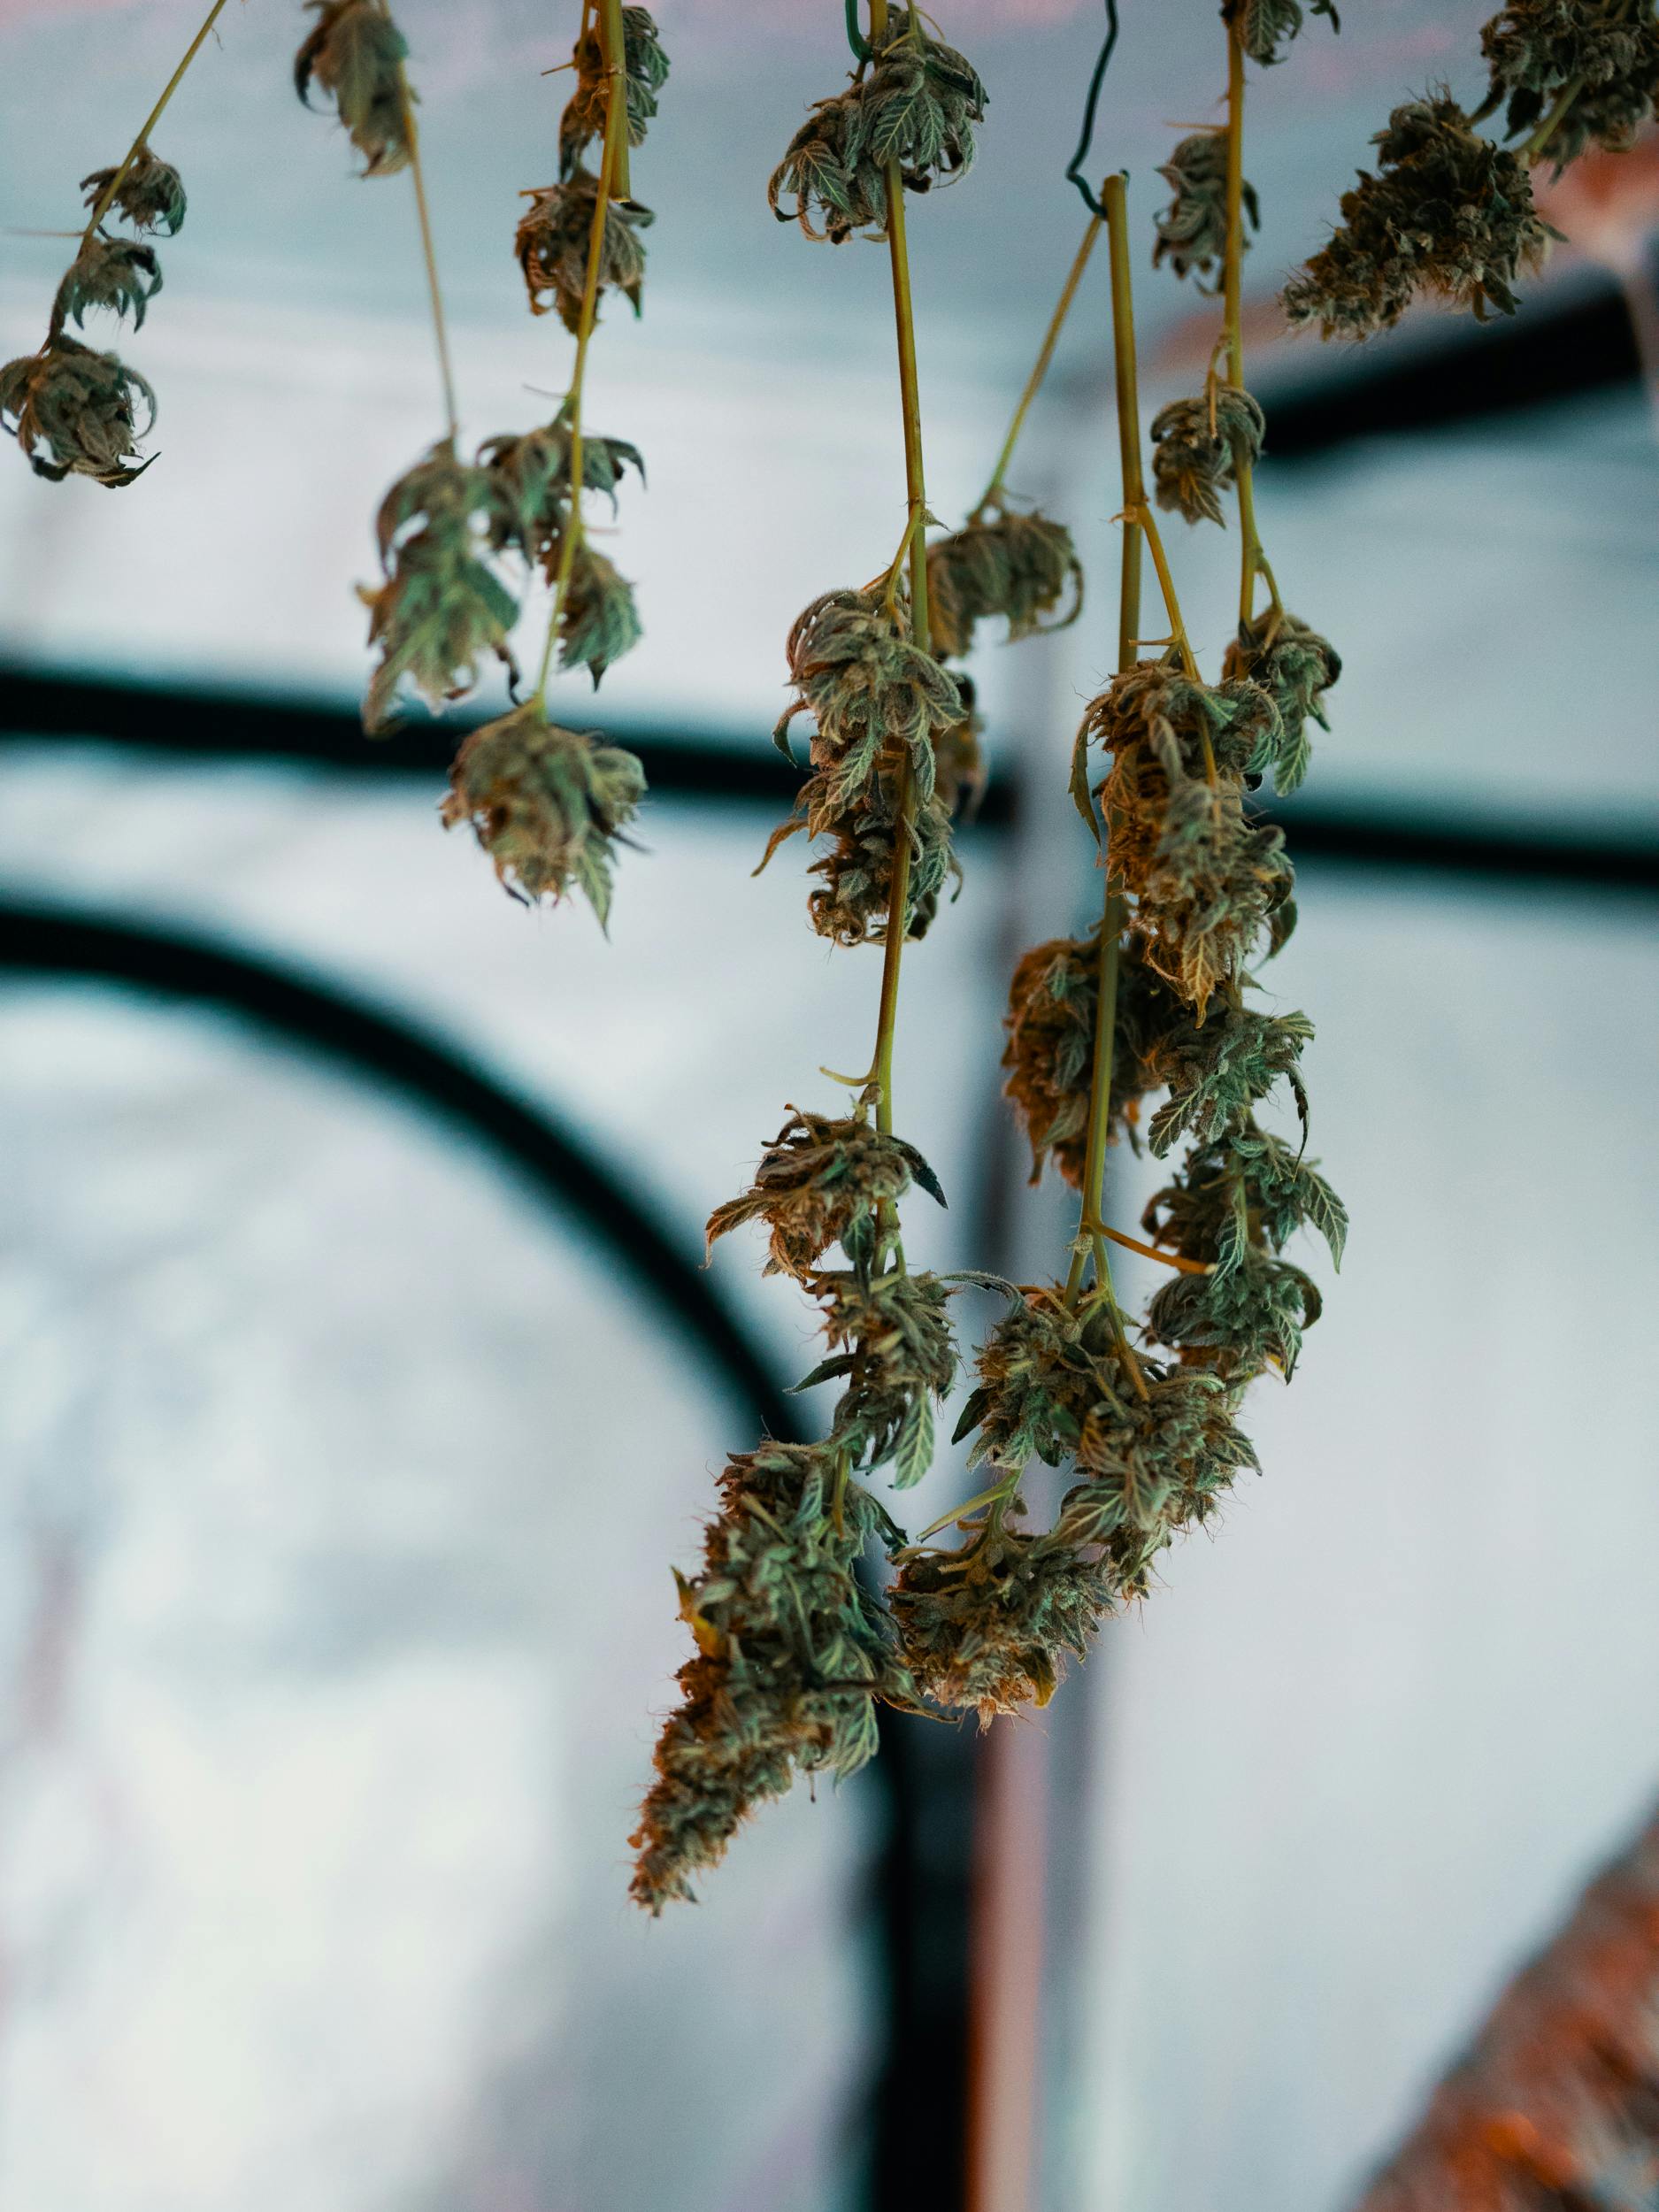 How to Dry Cannabis 3 Heres How to Dry Cannabis Like a Pro